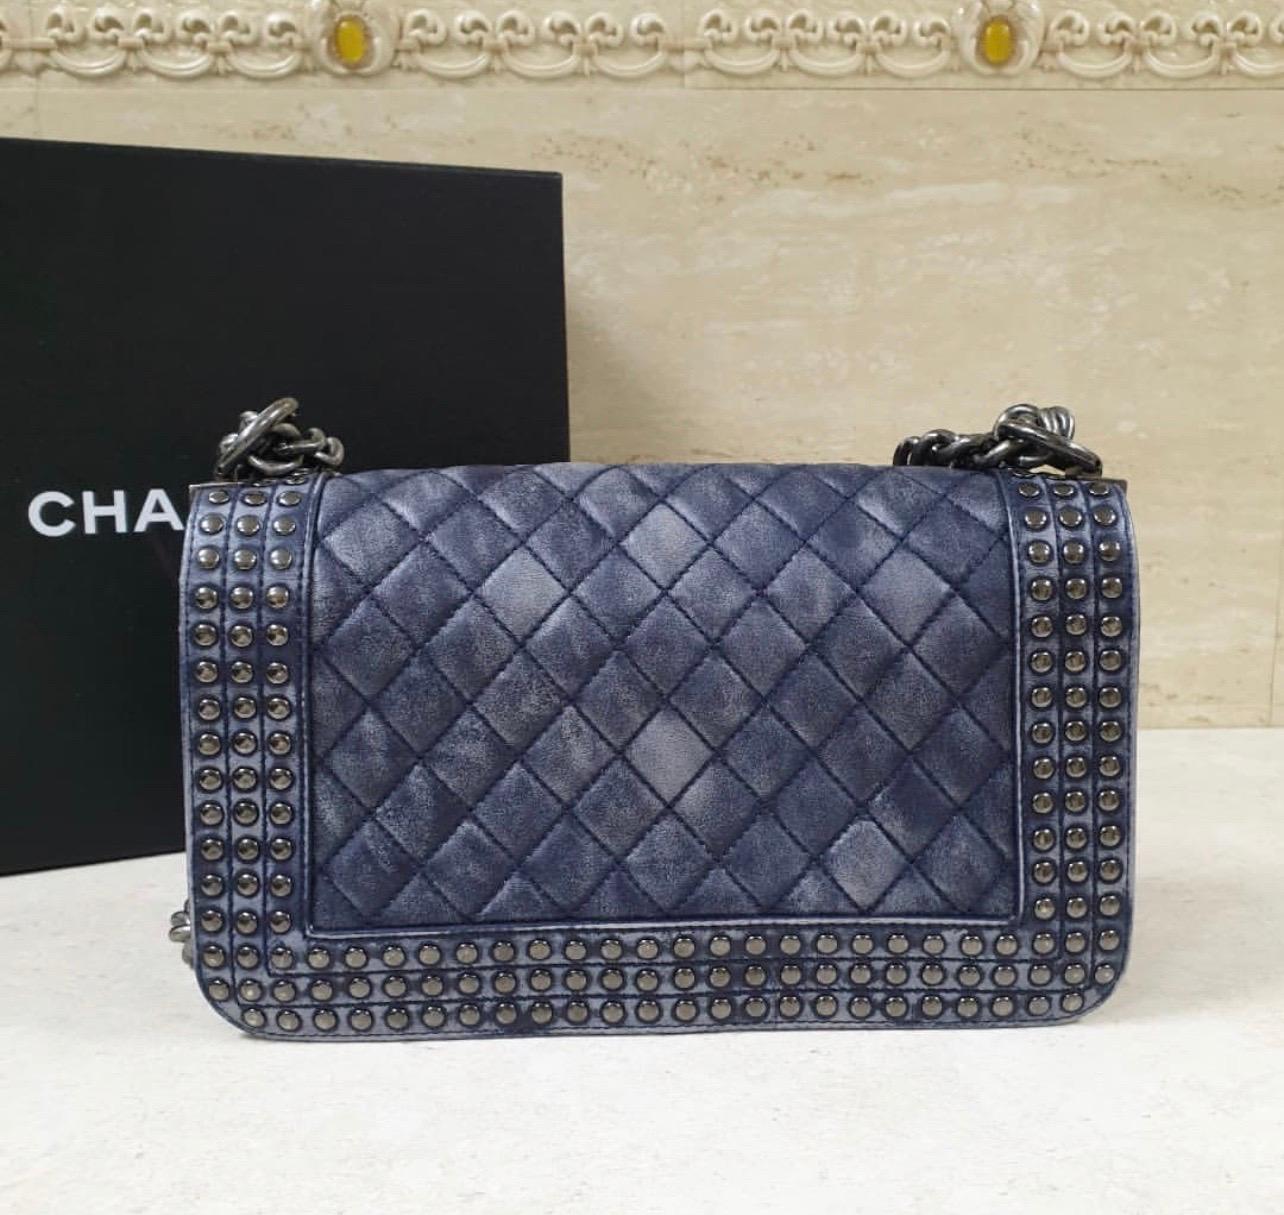 Black Chanel Faded Leather and Studded Medium Boy Flap Bag 